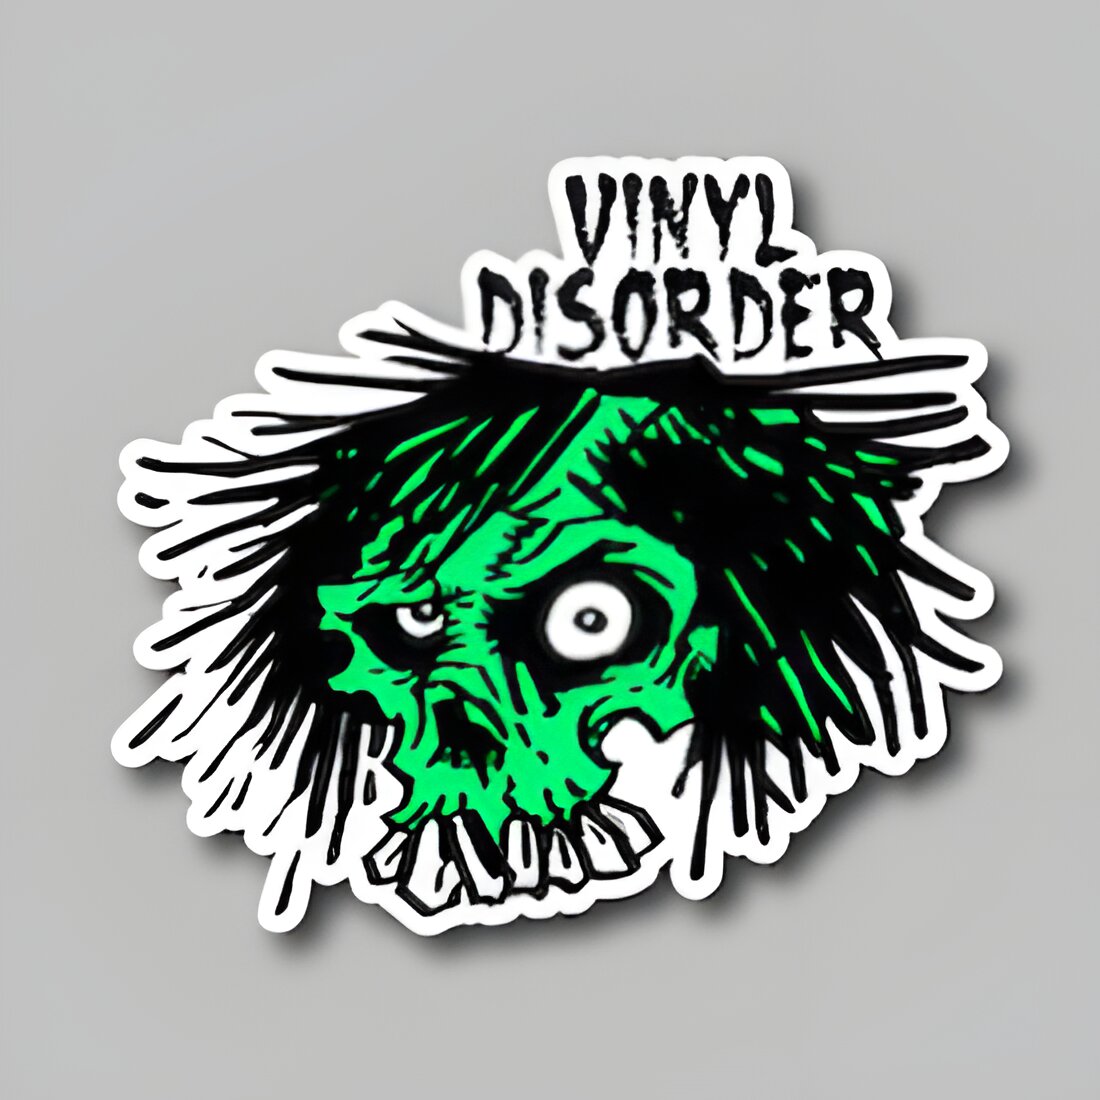 Free Stickers From Vinyl Disorder